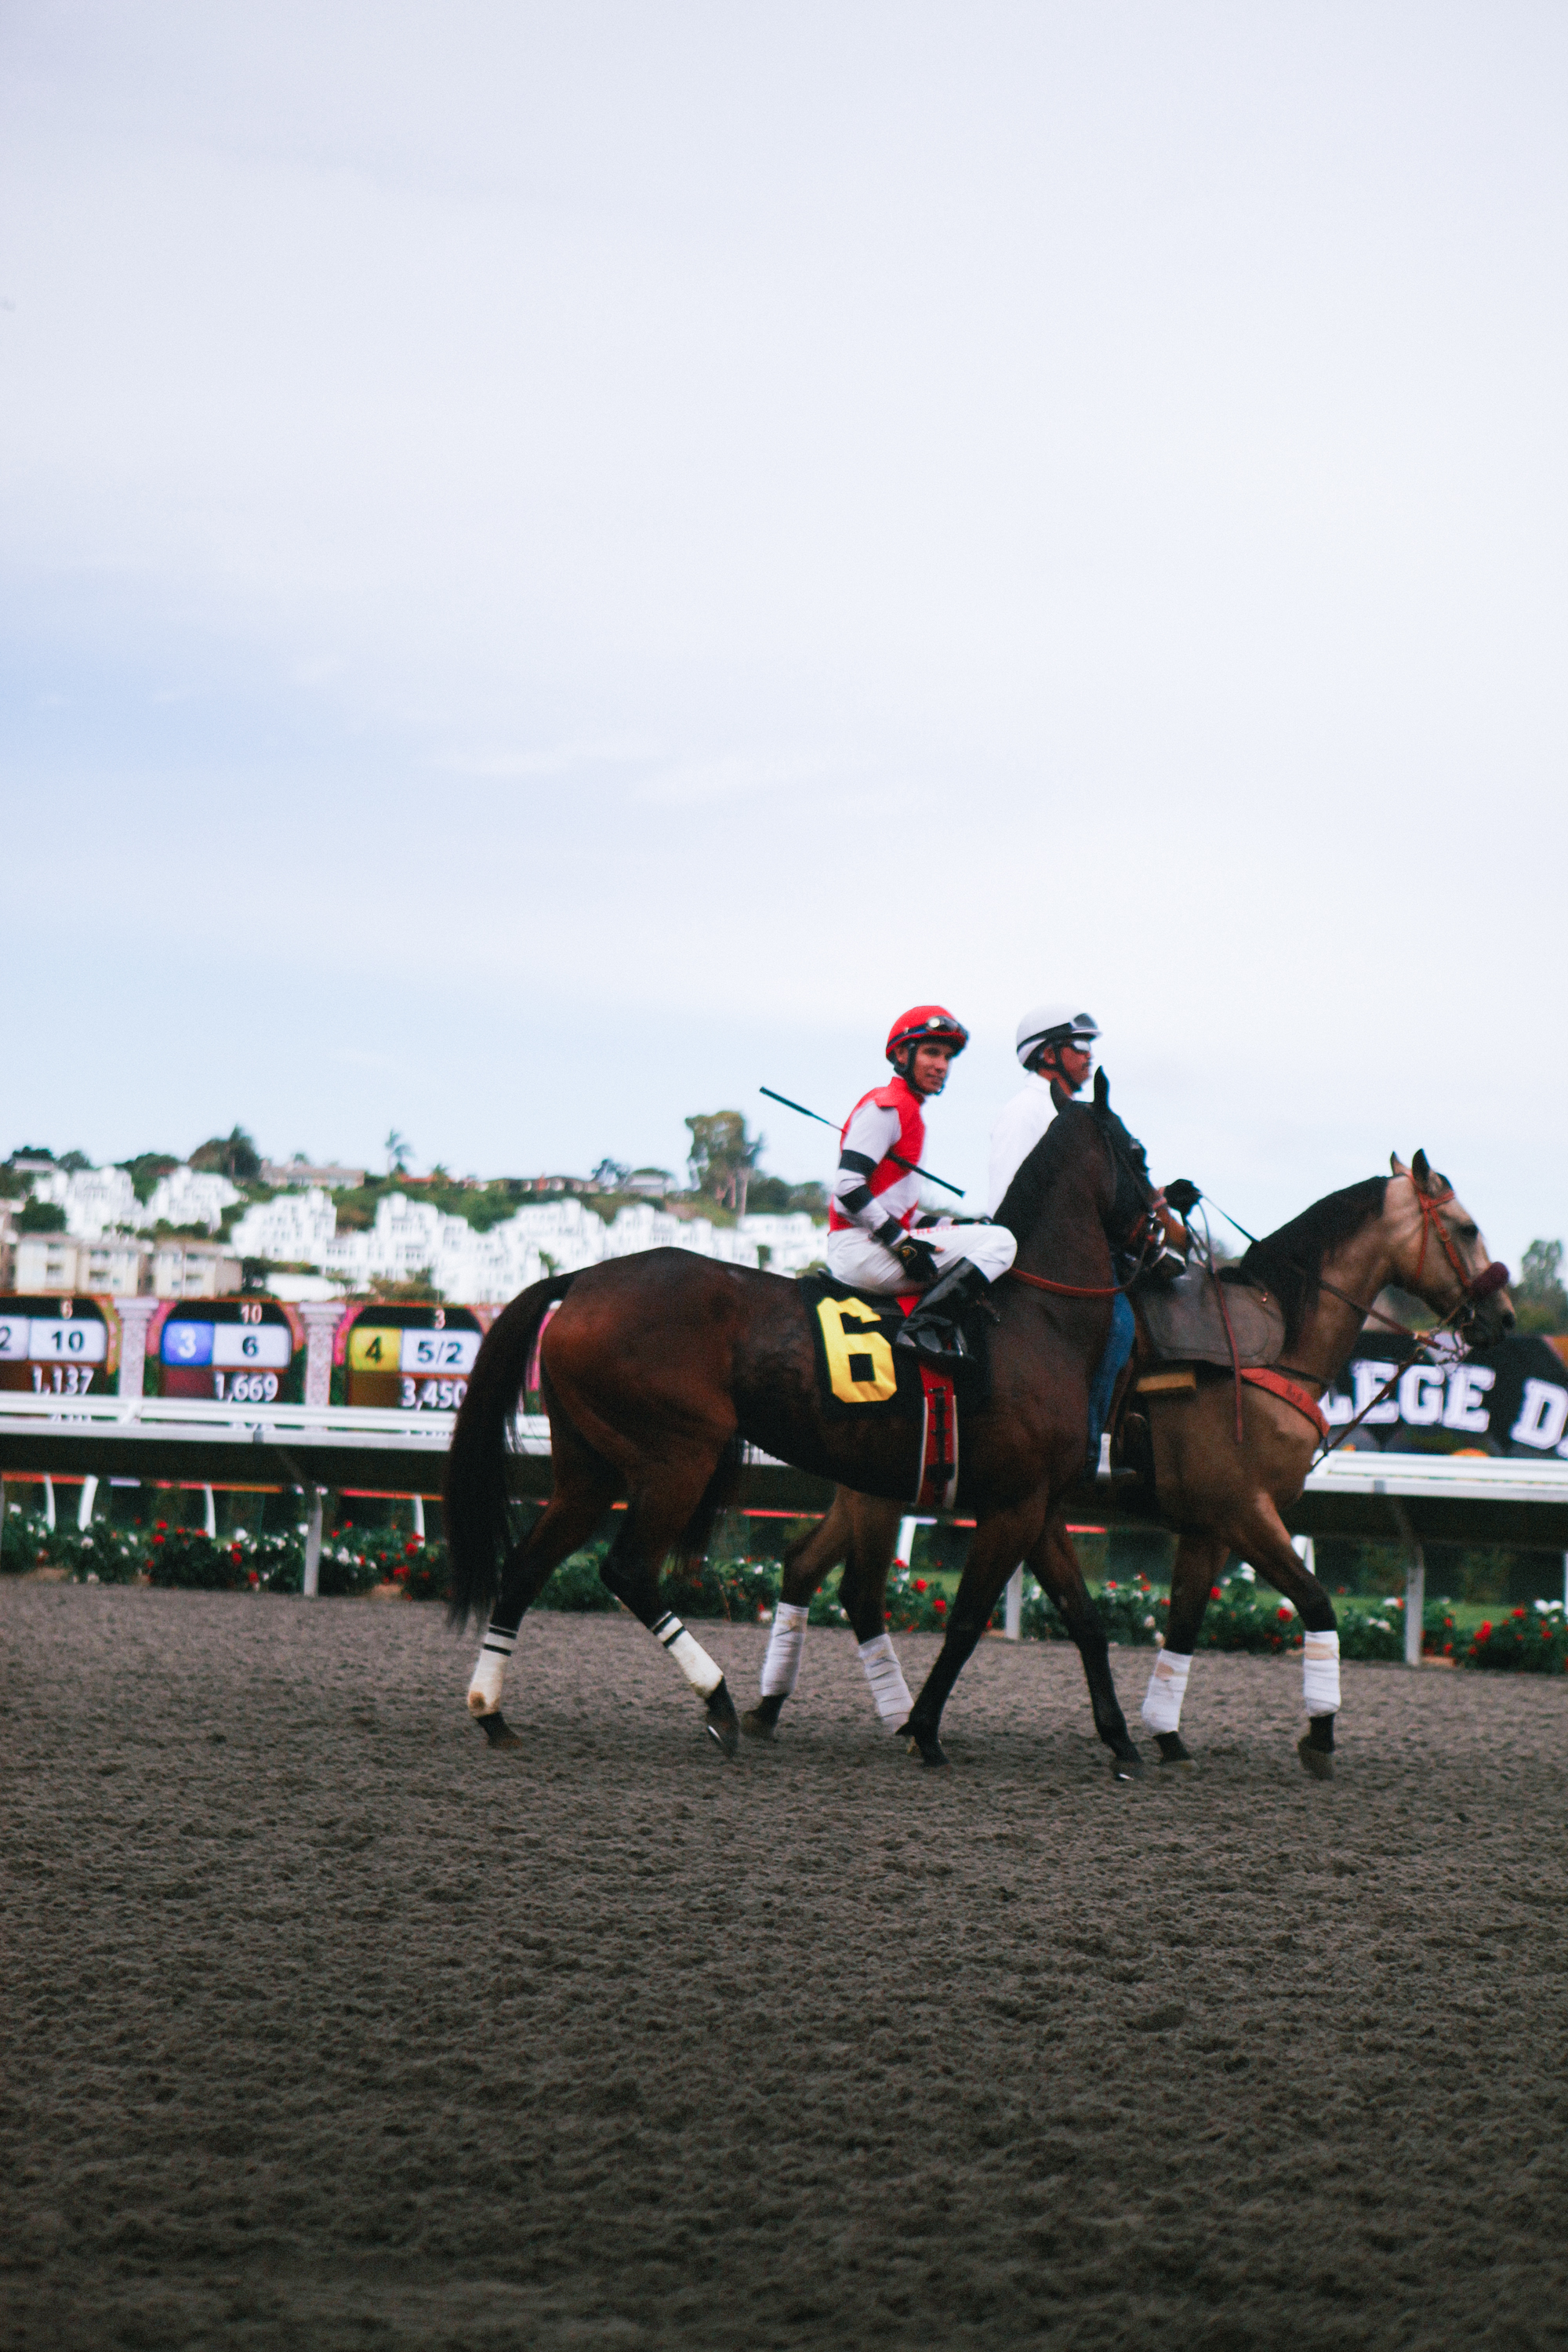 Established California | Things to Do | Del Mar Racetrack